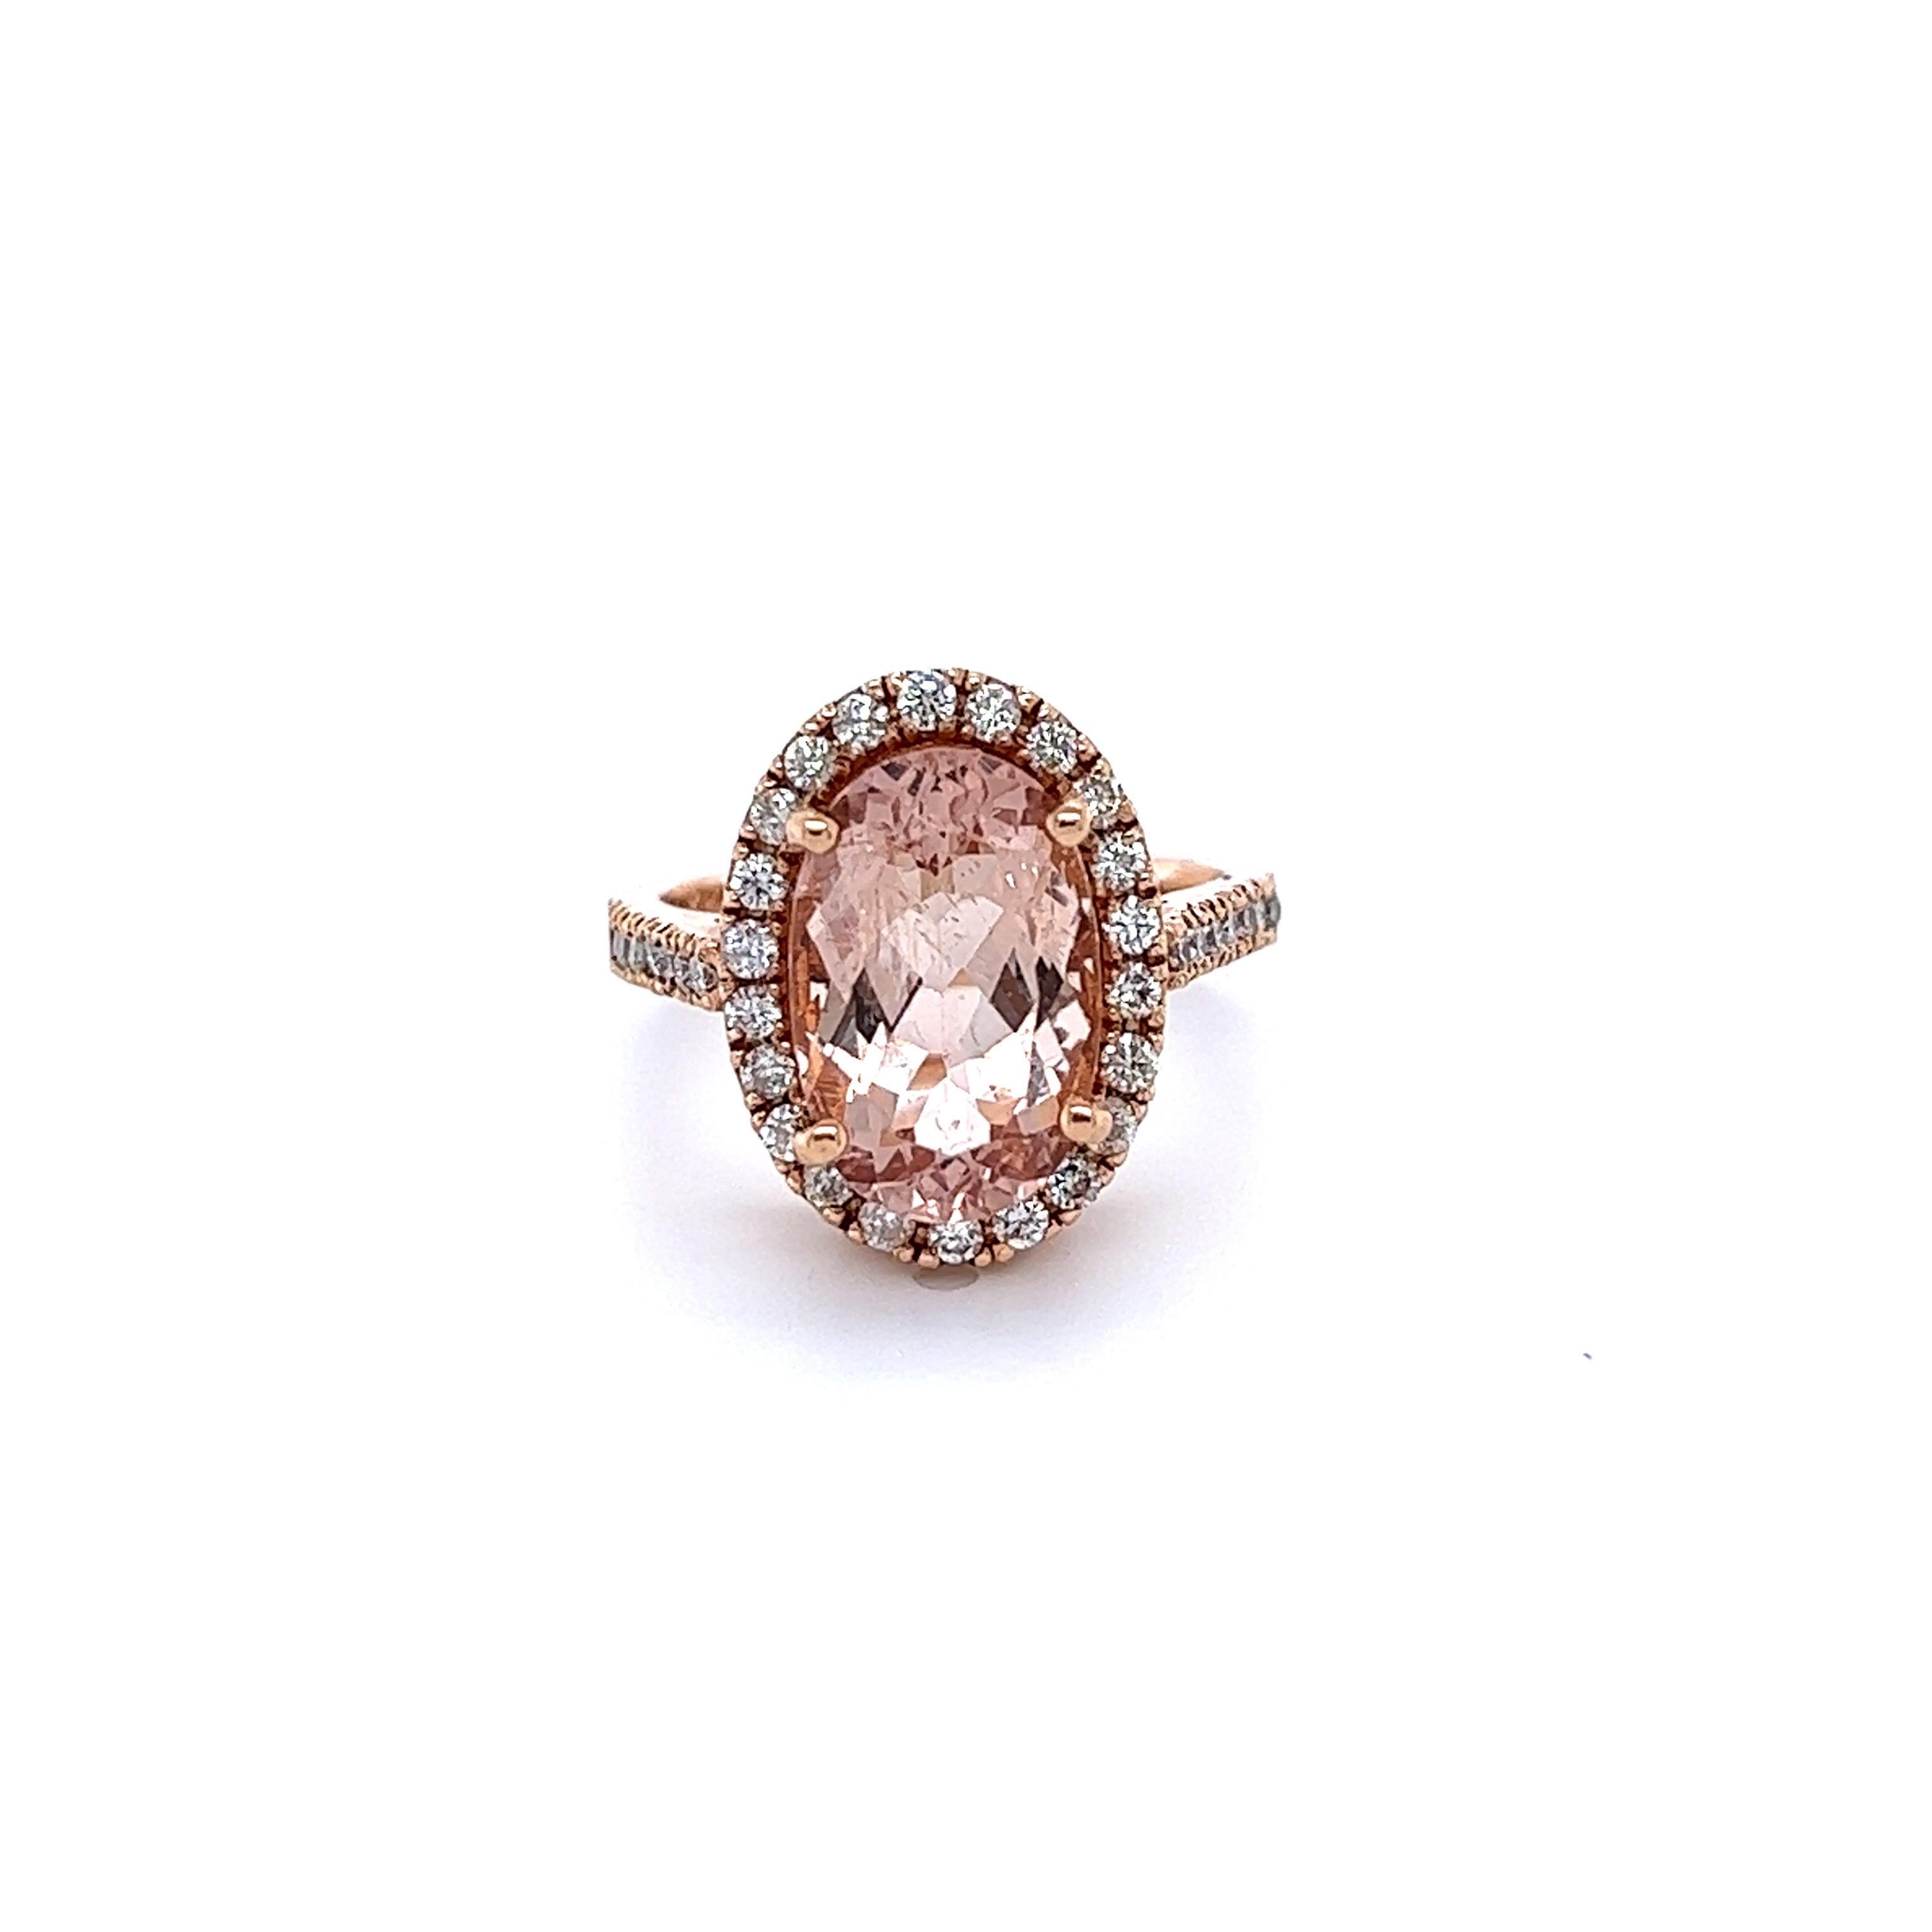 
This Morganite Diamond Ring has a 4.39 Carat Oval Cut Peach Morganite and is surrounded by 36 Round Cut Diamonds that weigh 0.61 carats. (Clarity: SI, Color: F) The Total Carat Weight of the ring is 5.00 Carats.  

The morganite measures at